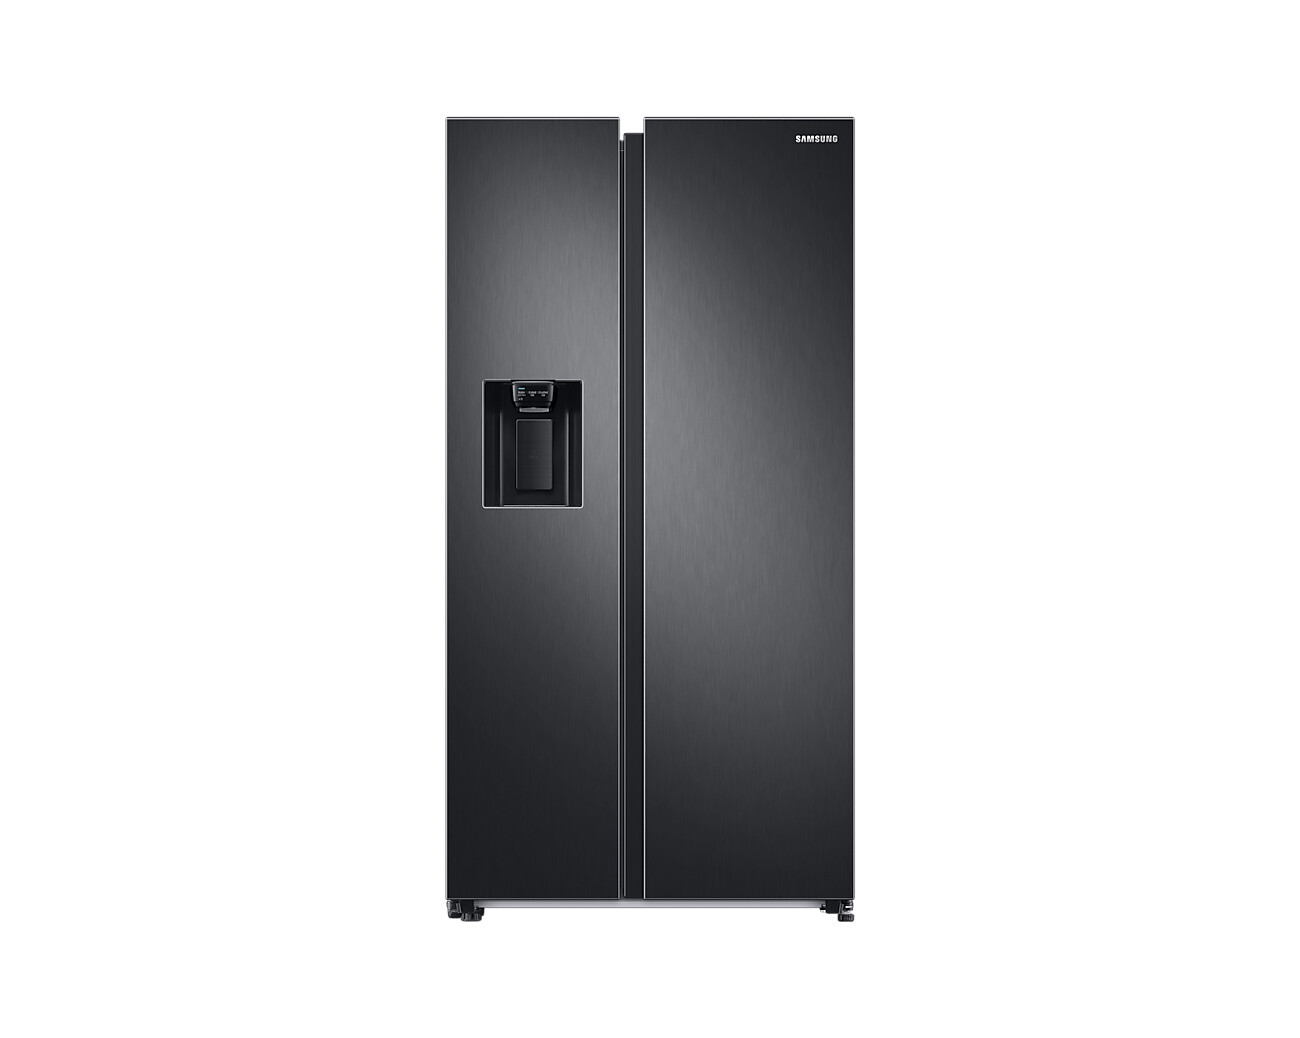 Samsung Series 8 RS68A884CB1 Plumbed Frost Free American Fridge Freezer – Black – C Rated #367044